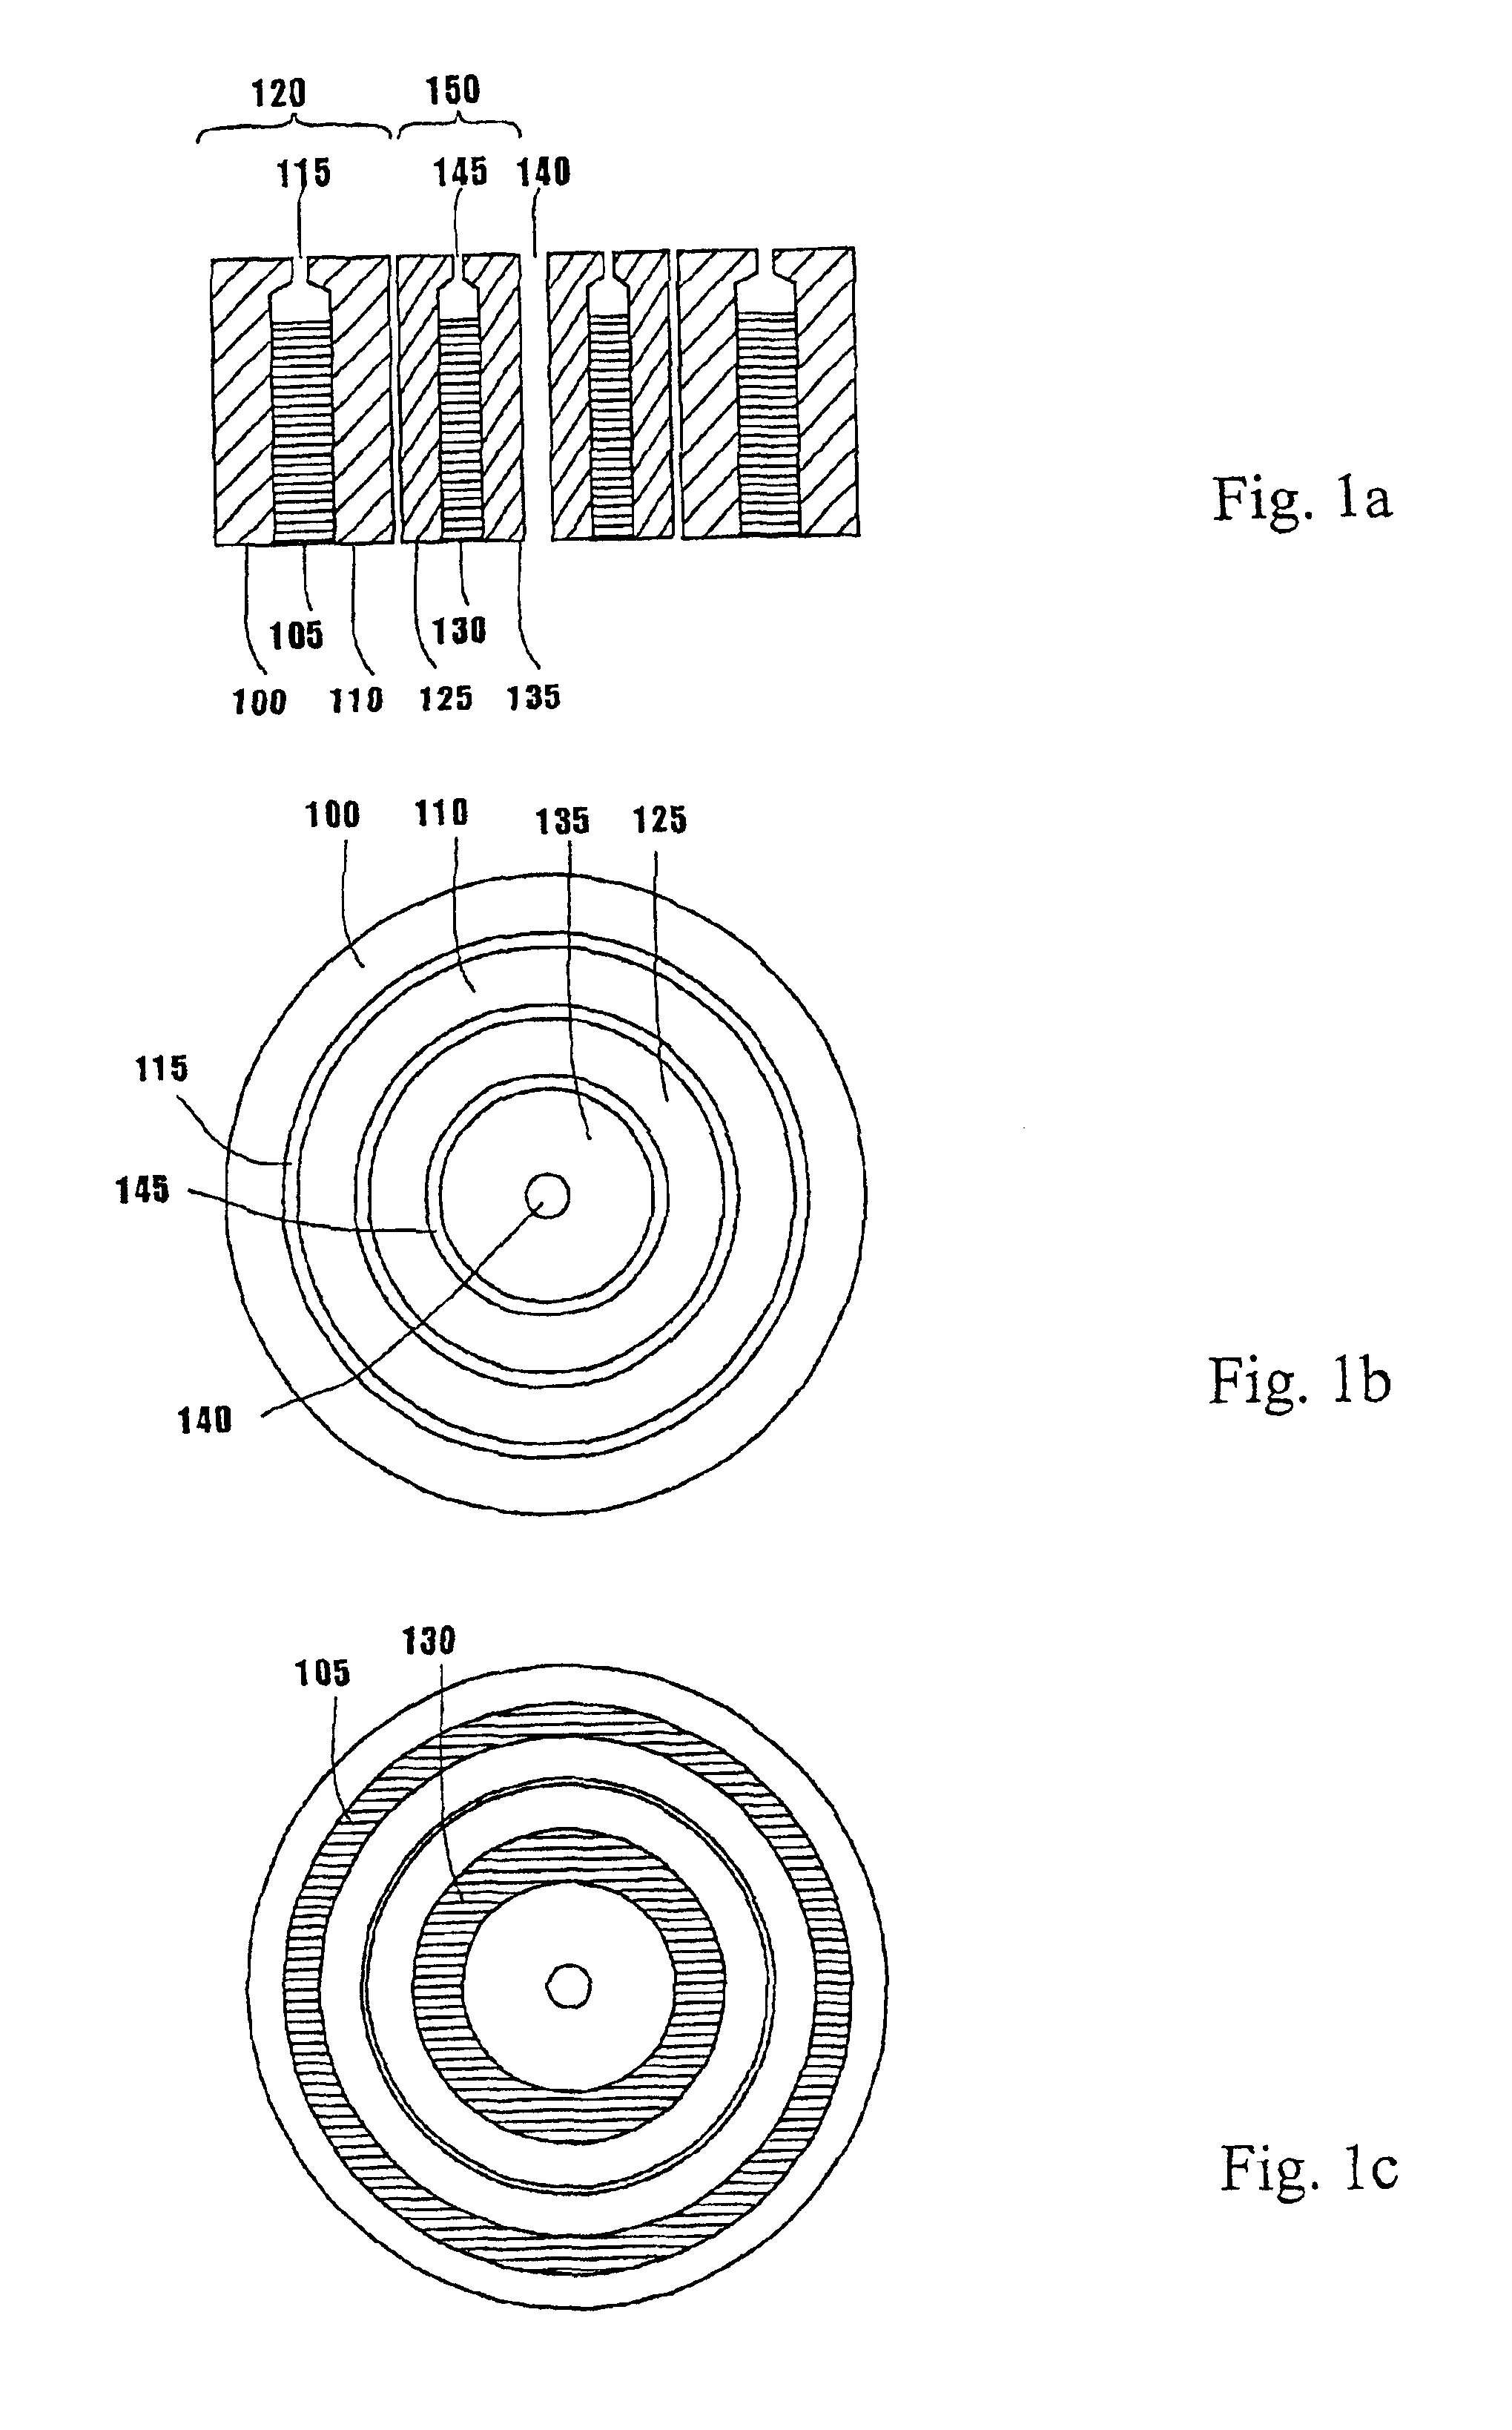 Concentric co-planar multiband electro-acoustic converter